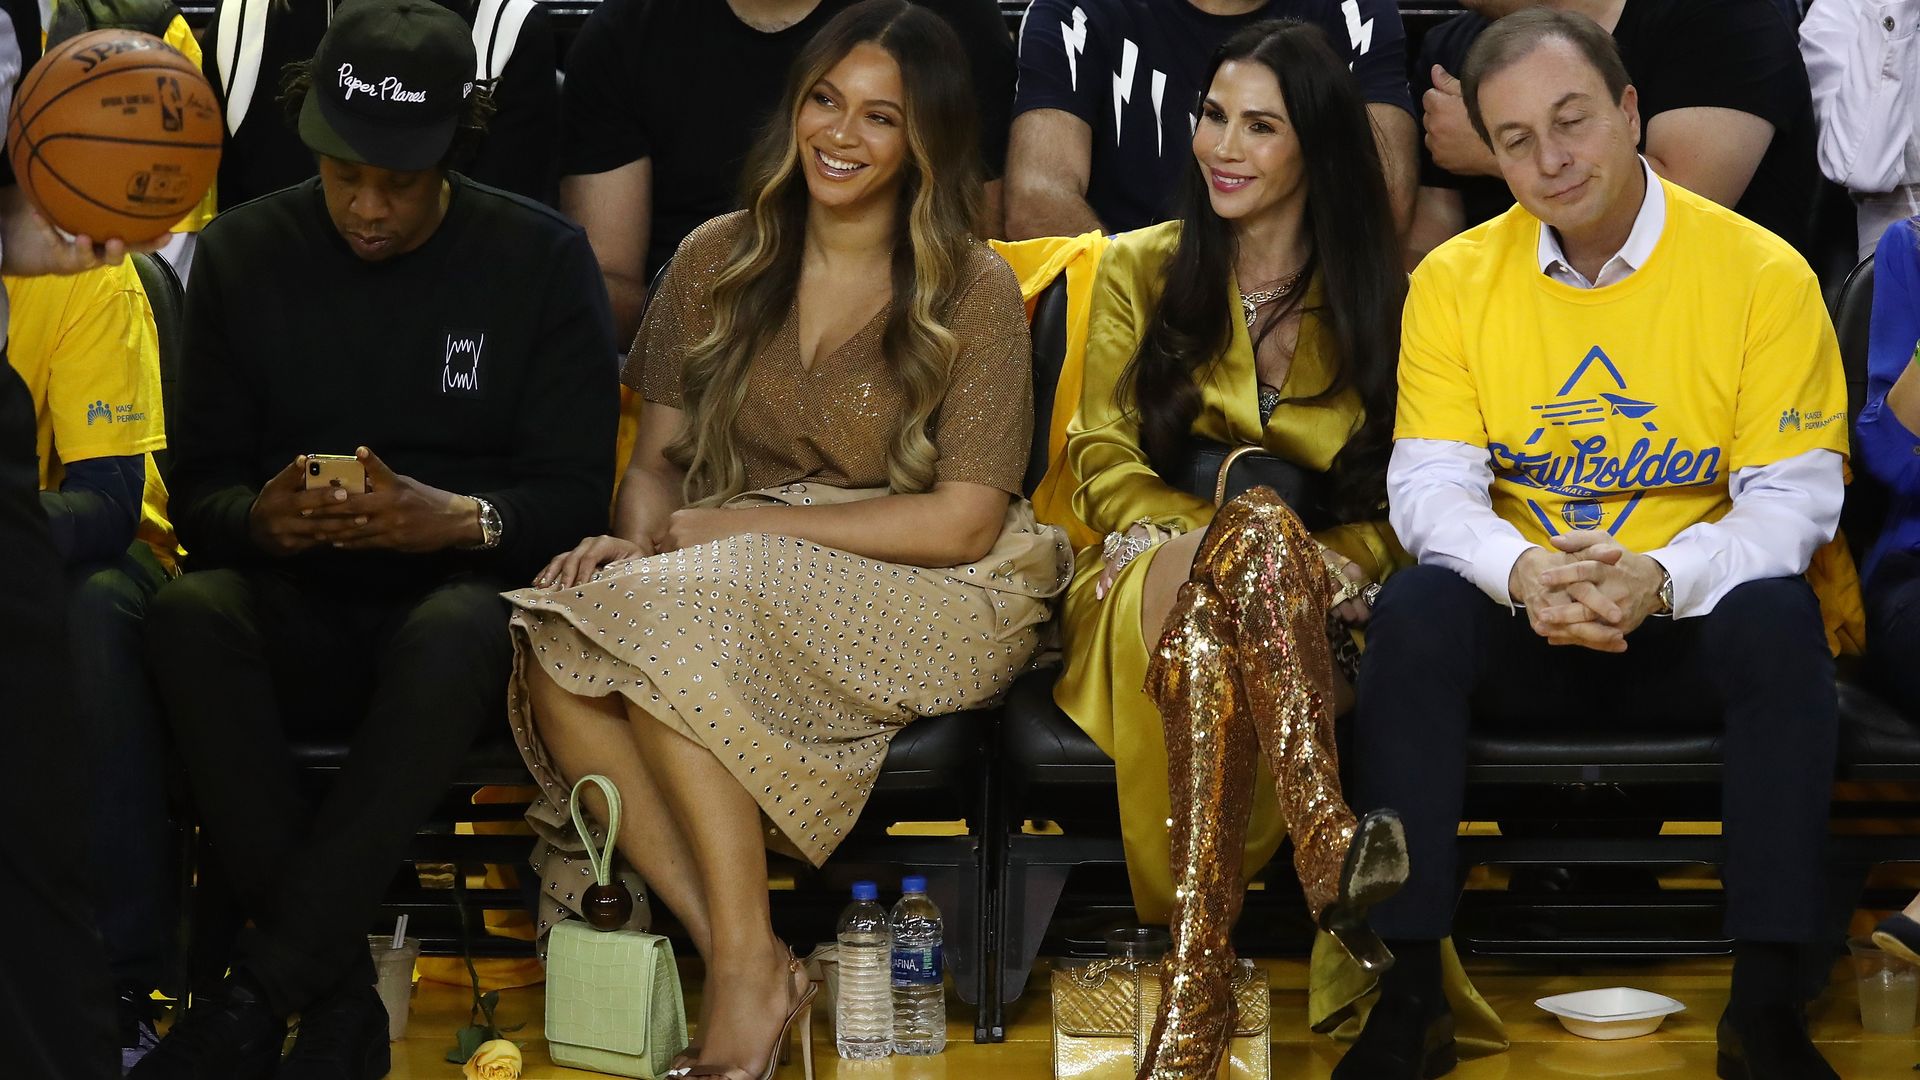 In this image, Beyonce sits next to others on a courtside basketball game.